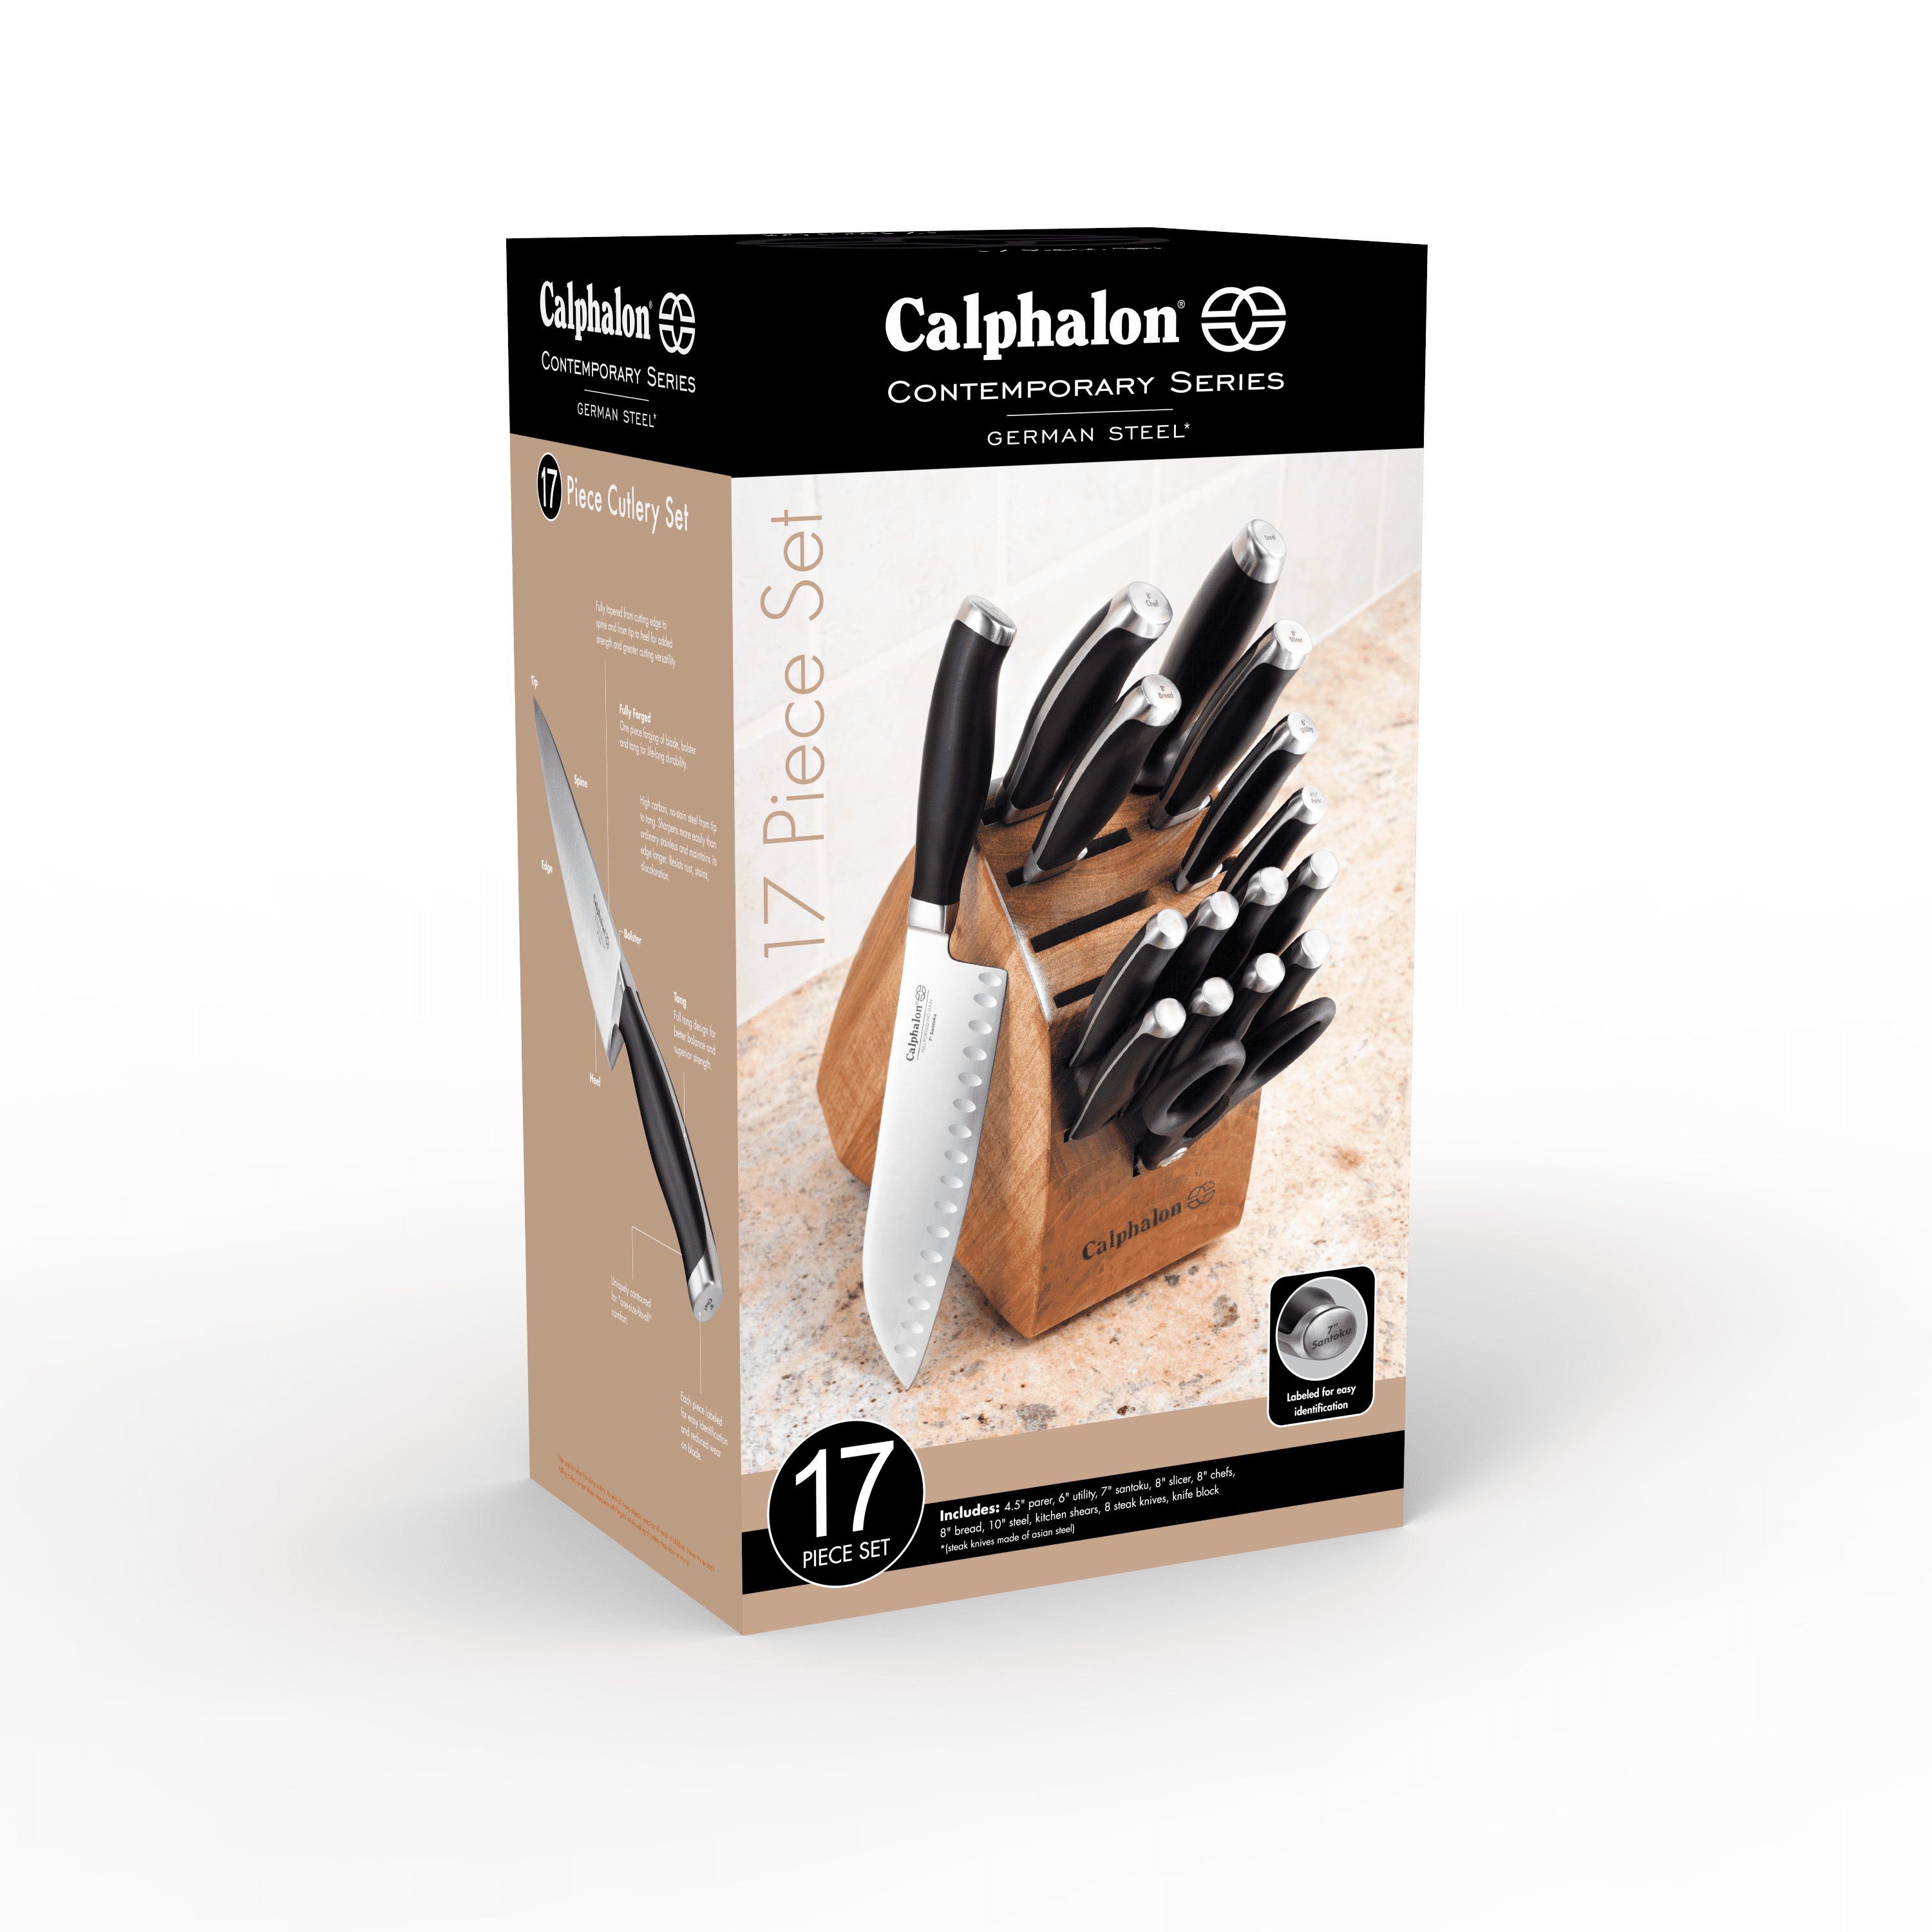 This Calphalon 18-Piece Knife Block Set is $80 off and includes a